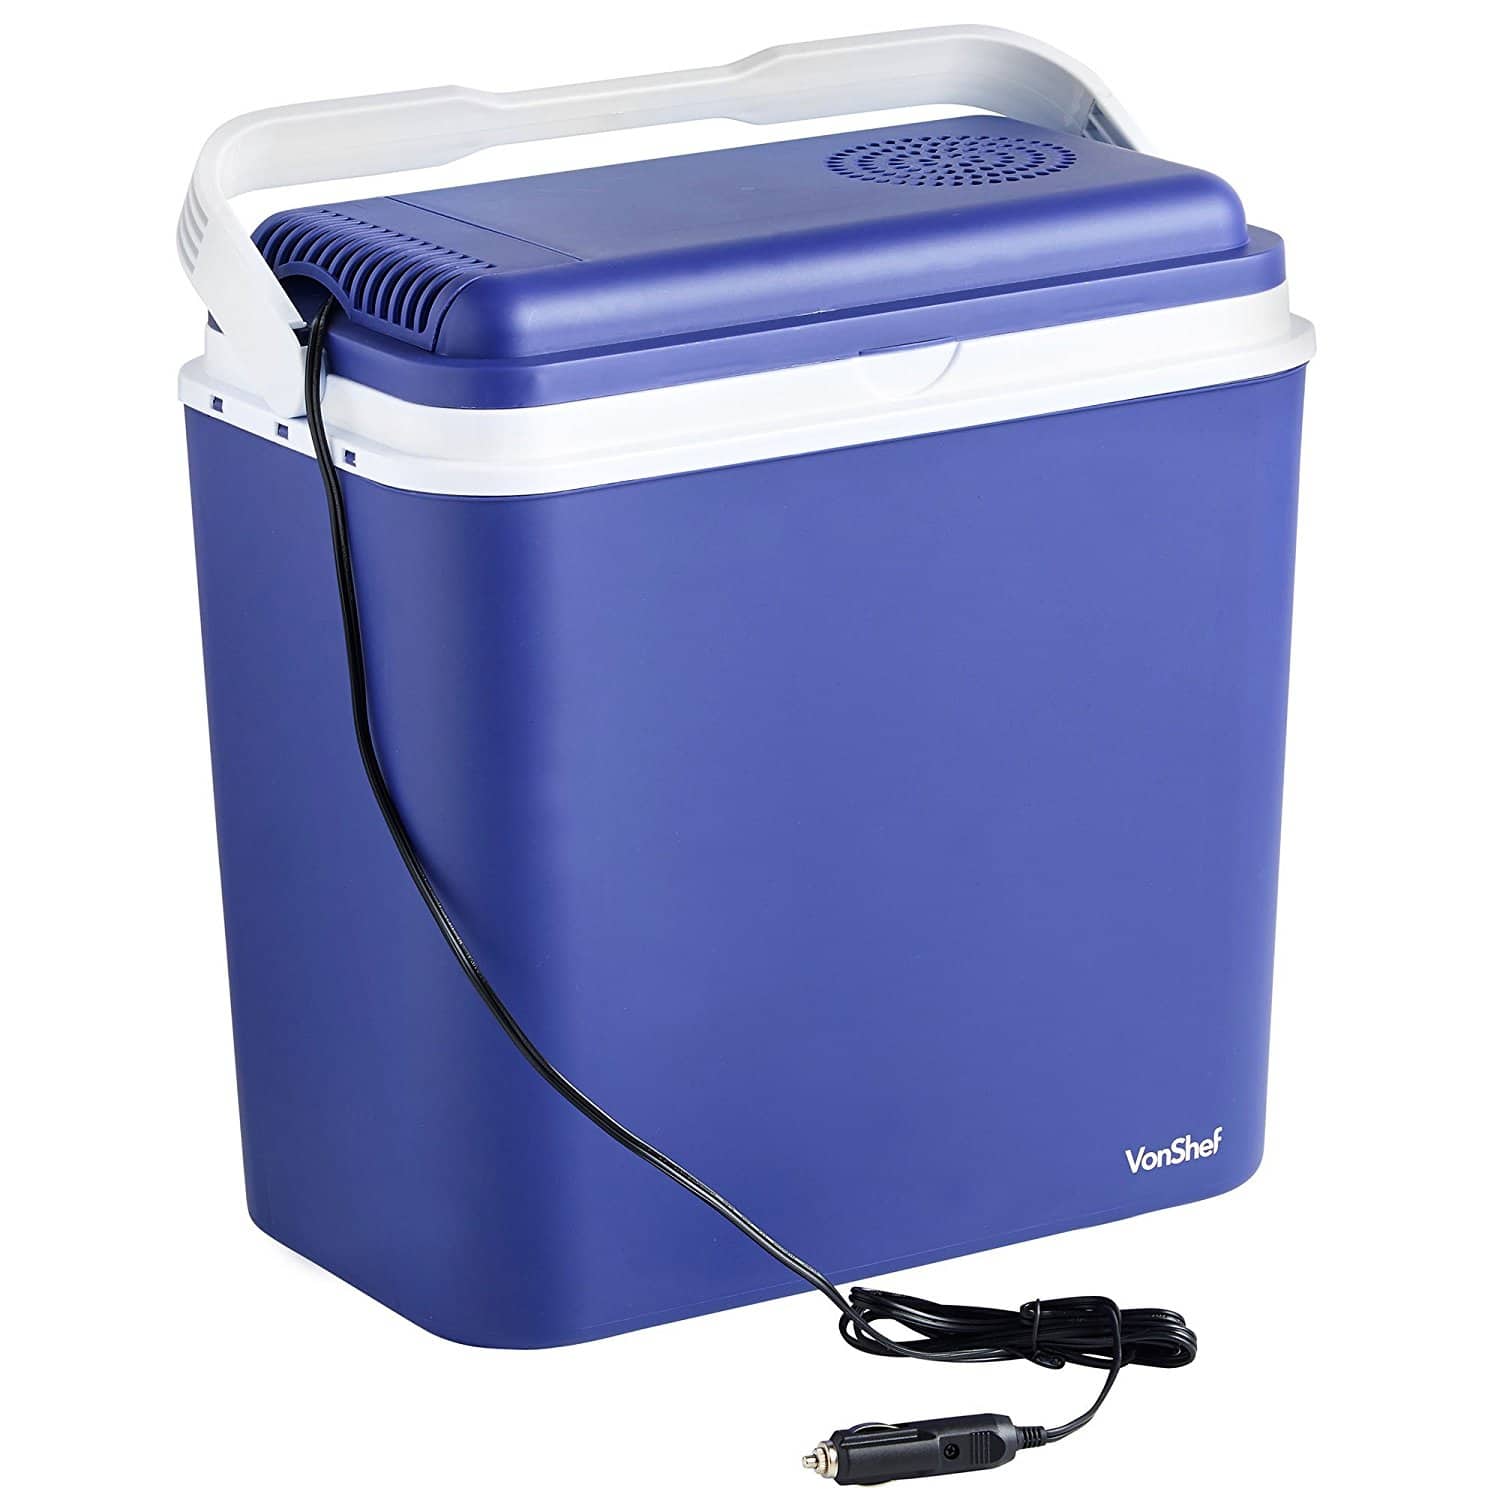 Review of Andes Large 24L Coolbox & Warm Heater